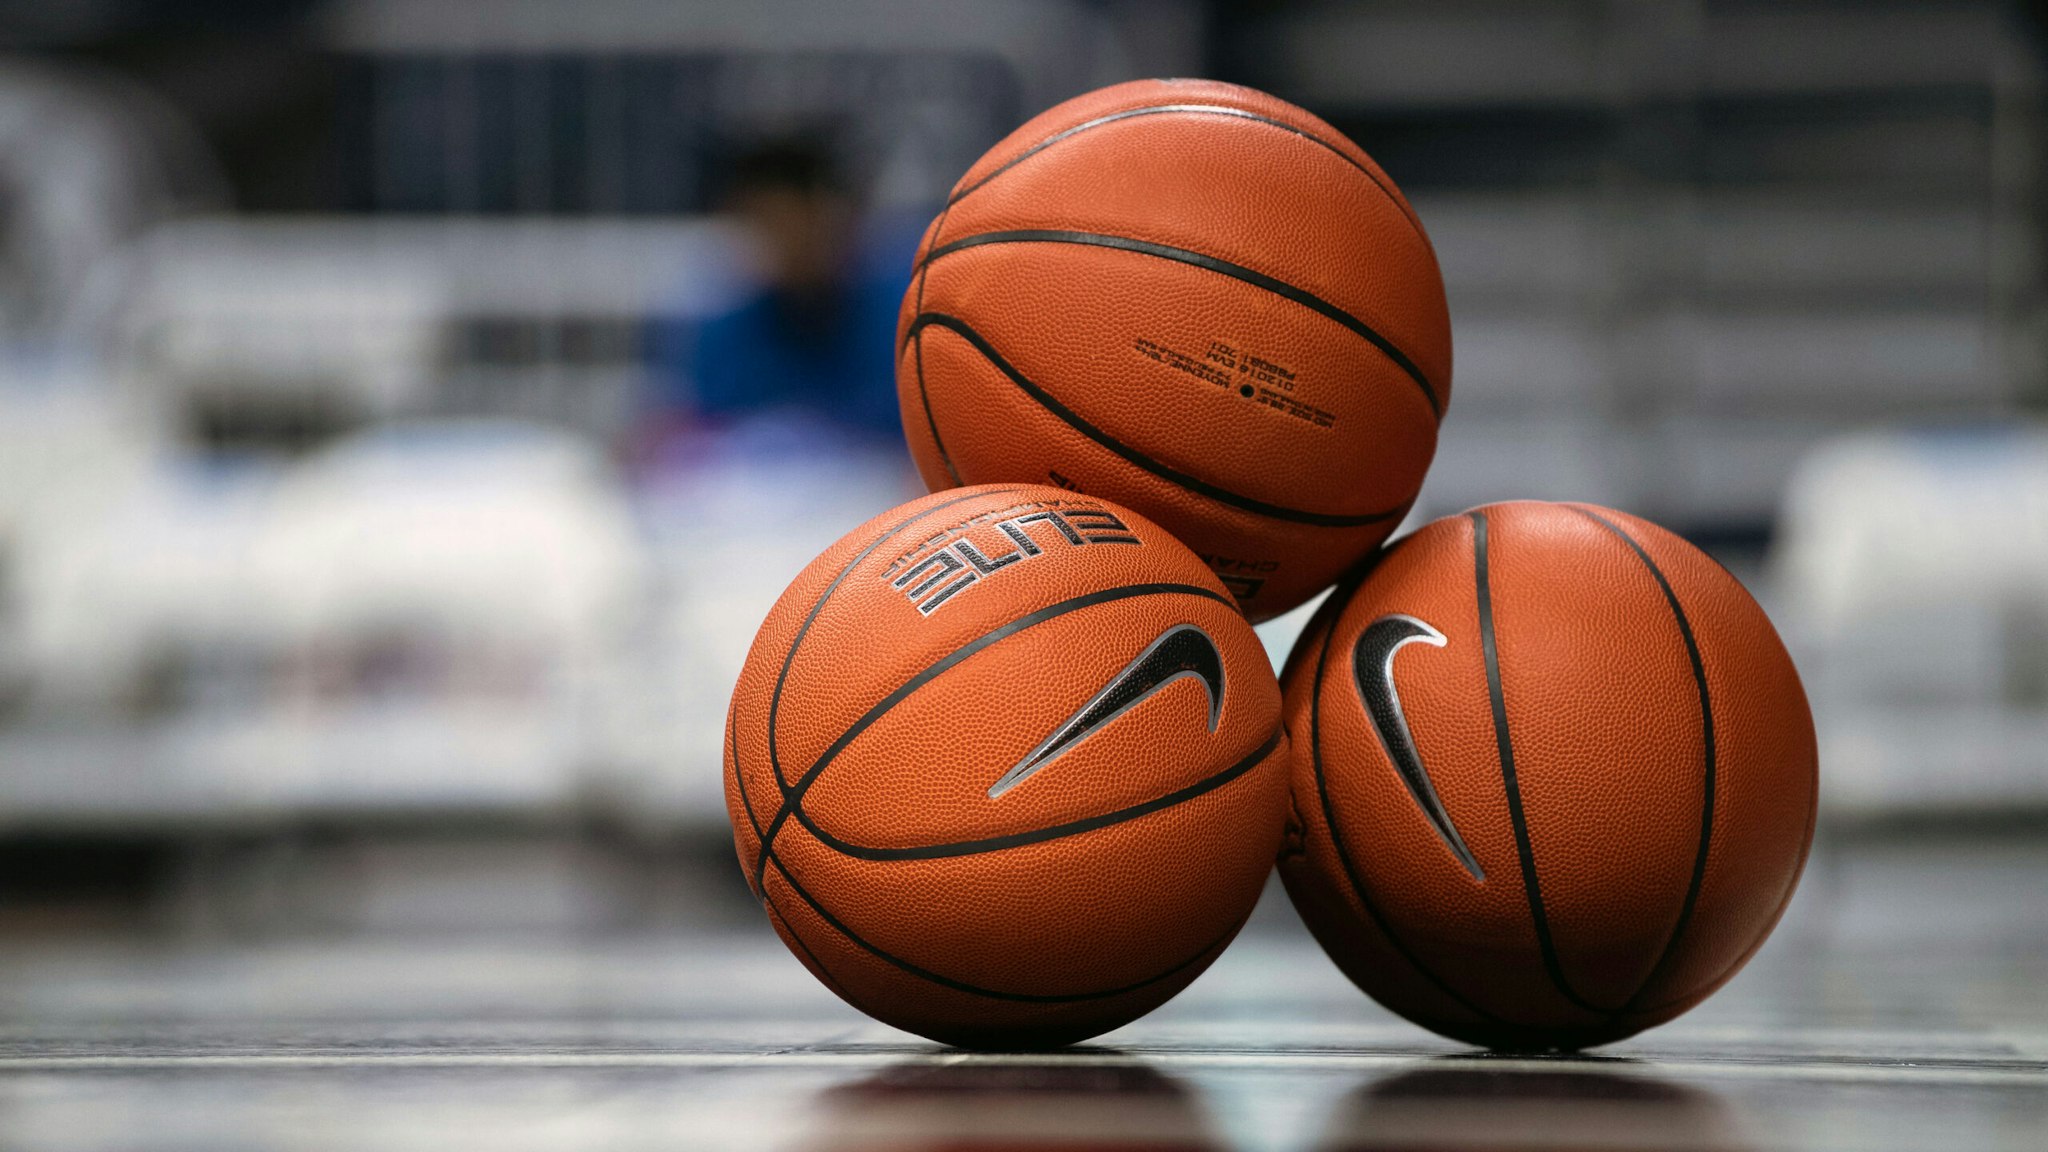 INDIANAPOLIS, IN - JANUARY 21: A stack of basketballs lays on the court before the women's college basketball game between the Butler Bulldogs and DePaul Blue Demons on January 21, 2021, at Hinkle Fieldhouse in Indianapolis, IN.